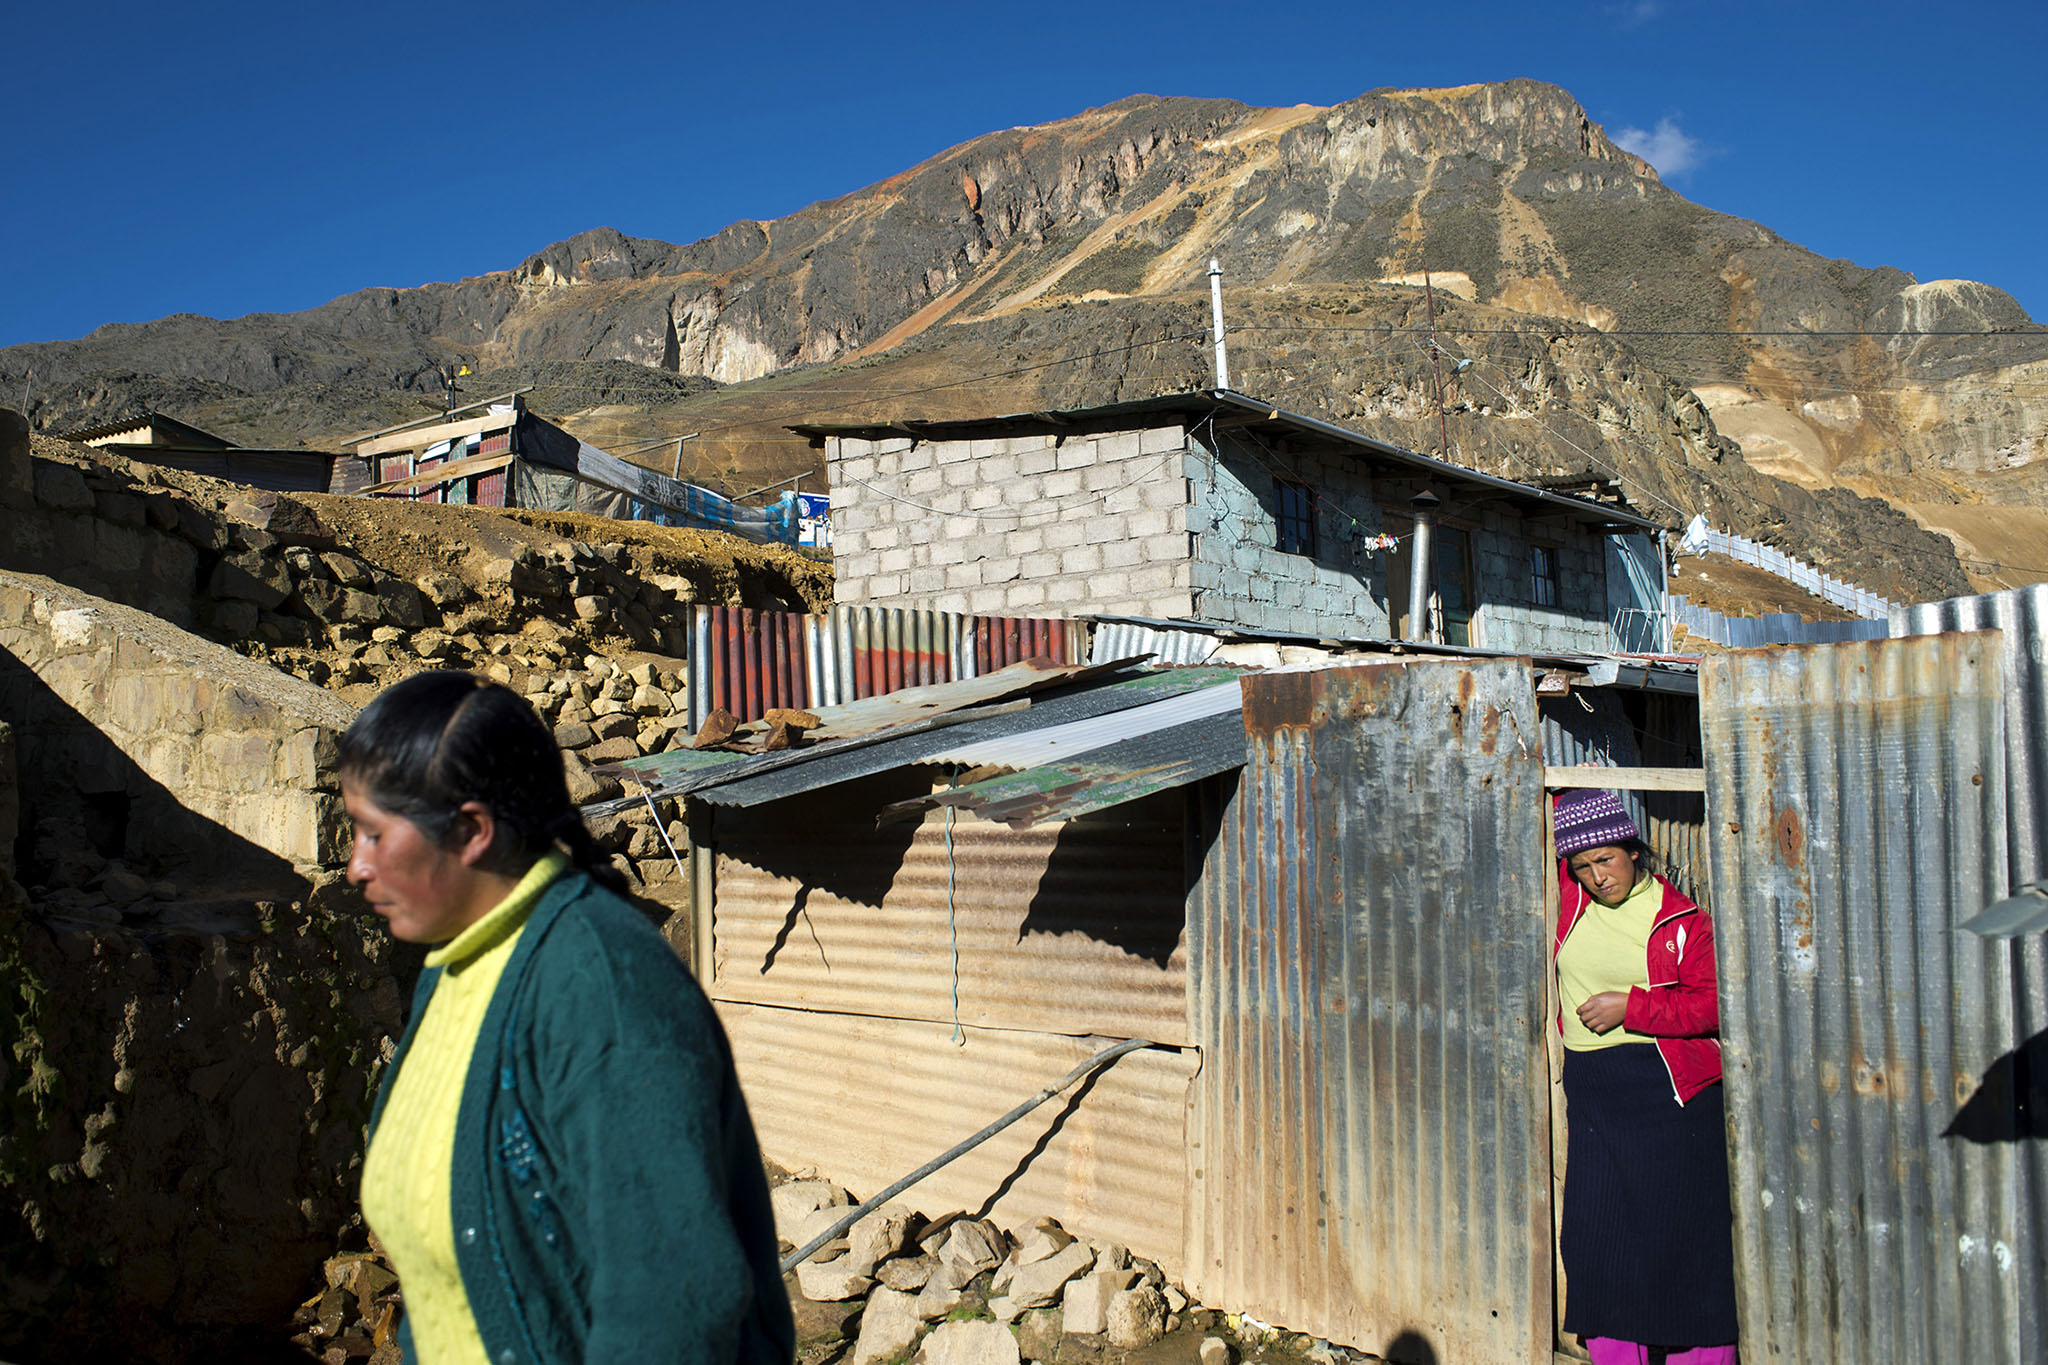 People near Peru’s Toromocho copper mine on November 28, 2012. The mine’s major Chinese investor has sought to displace residents. (Photo by Oscar Durand/New York Times)